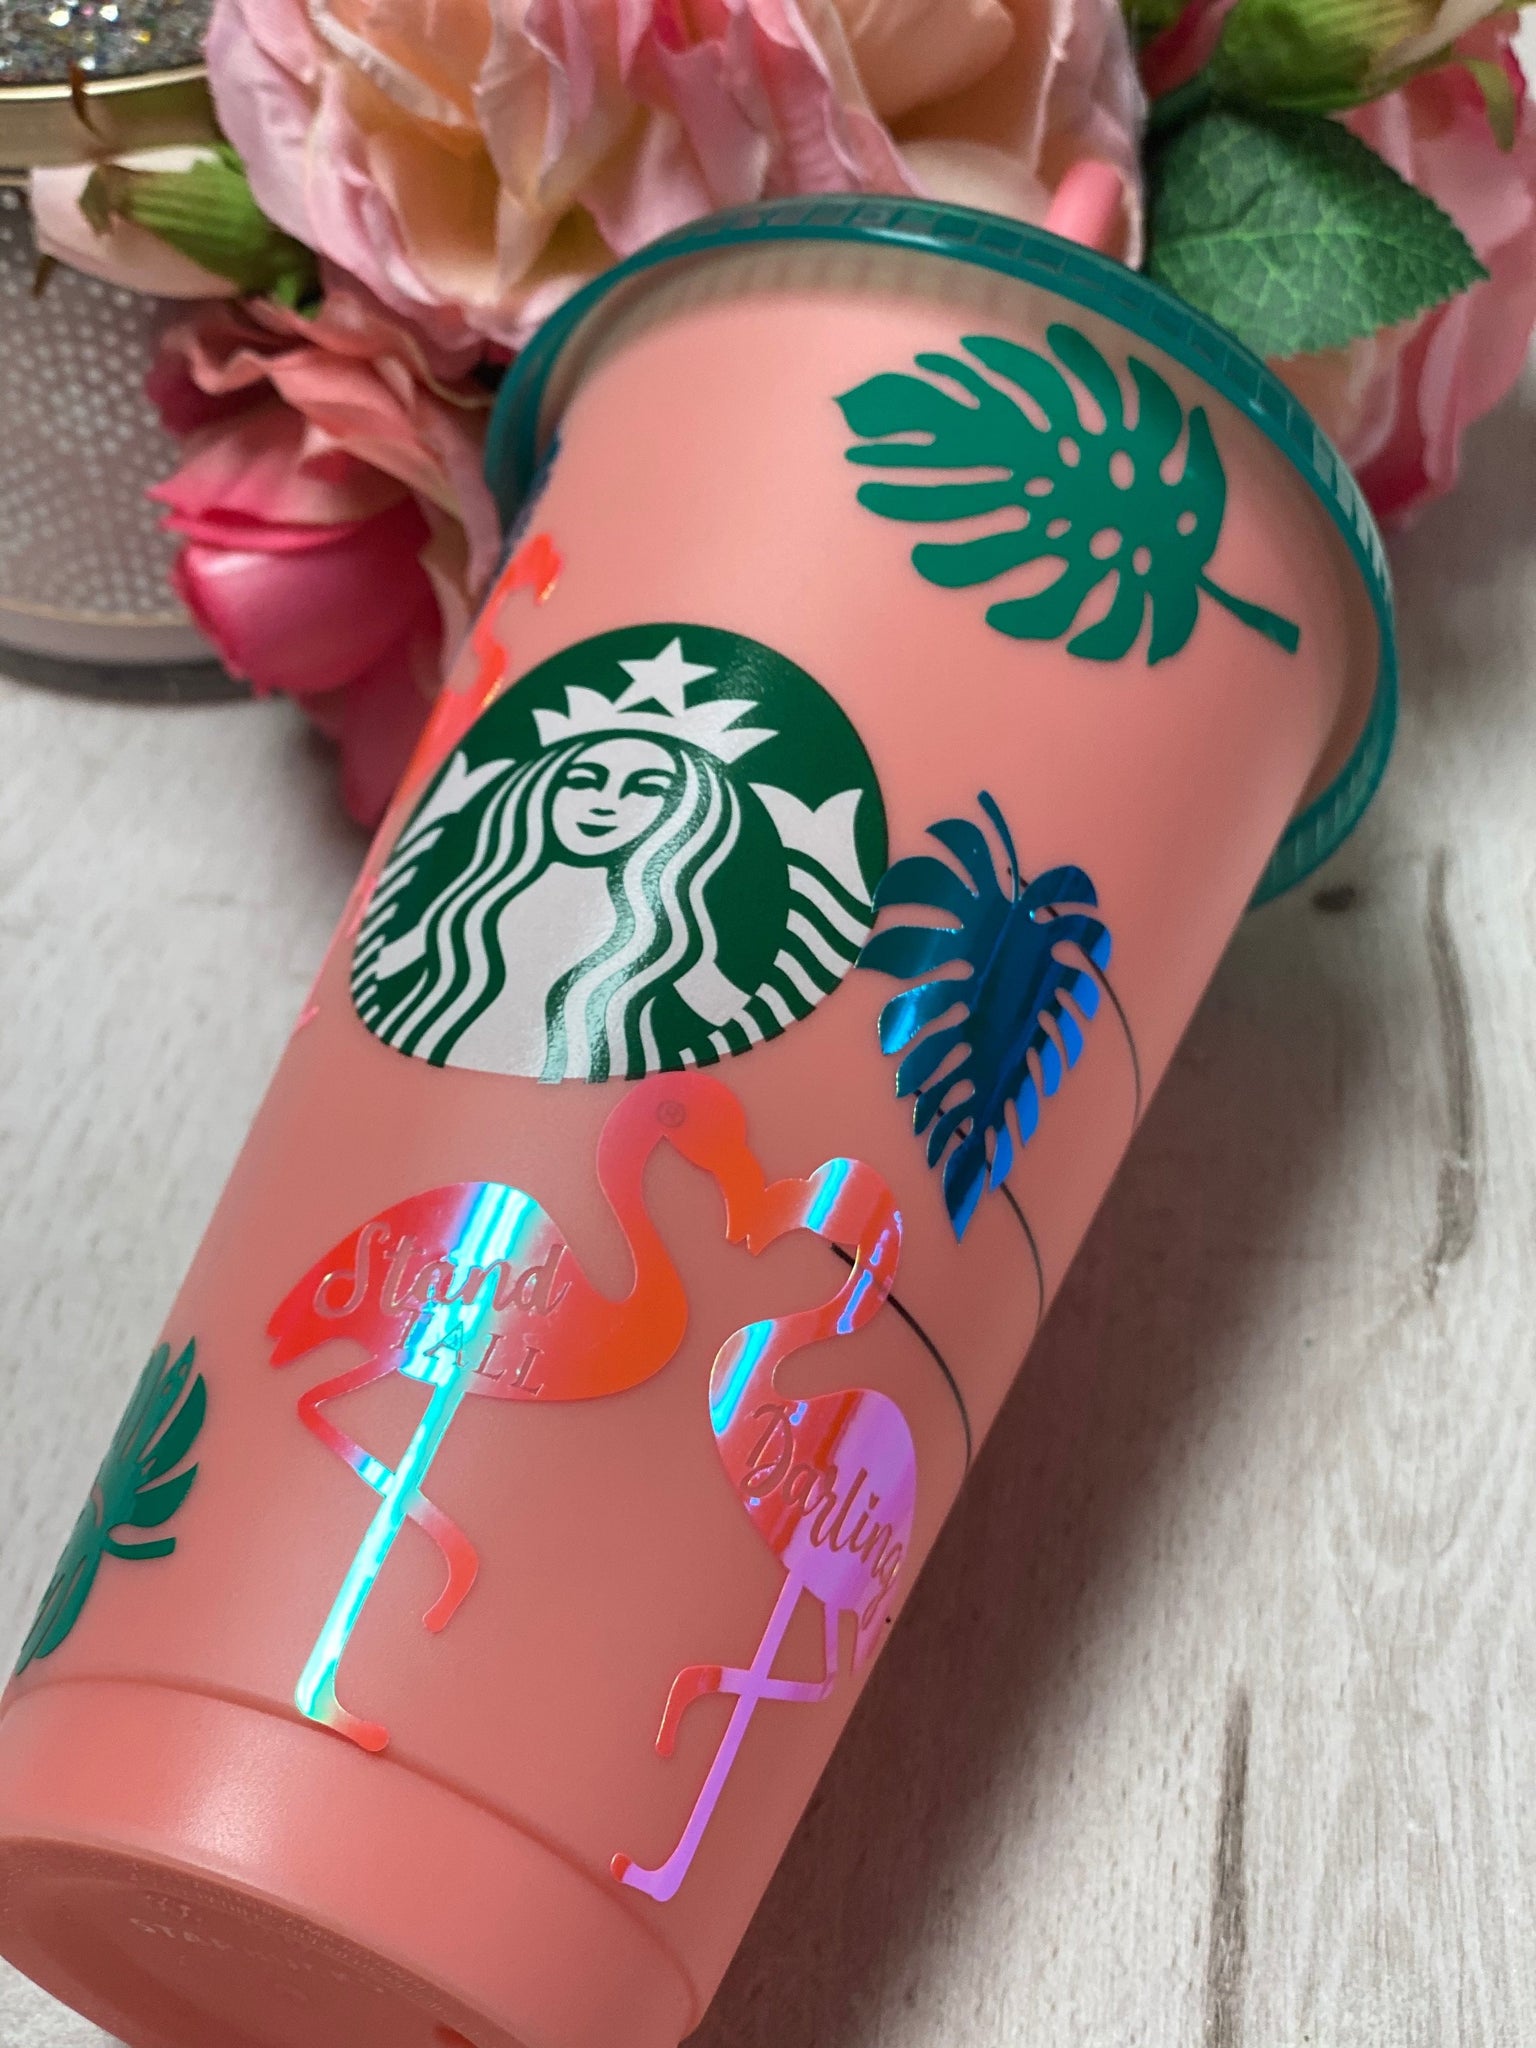 PERSONALIZED STARBUCKS REUSABLE CUP